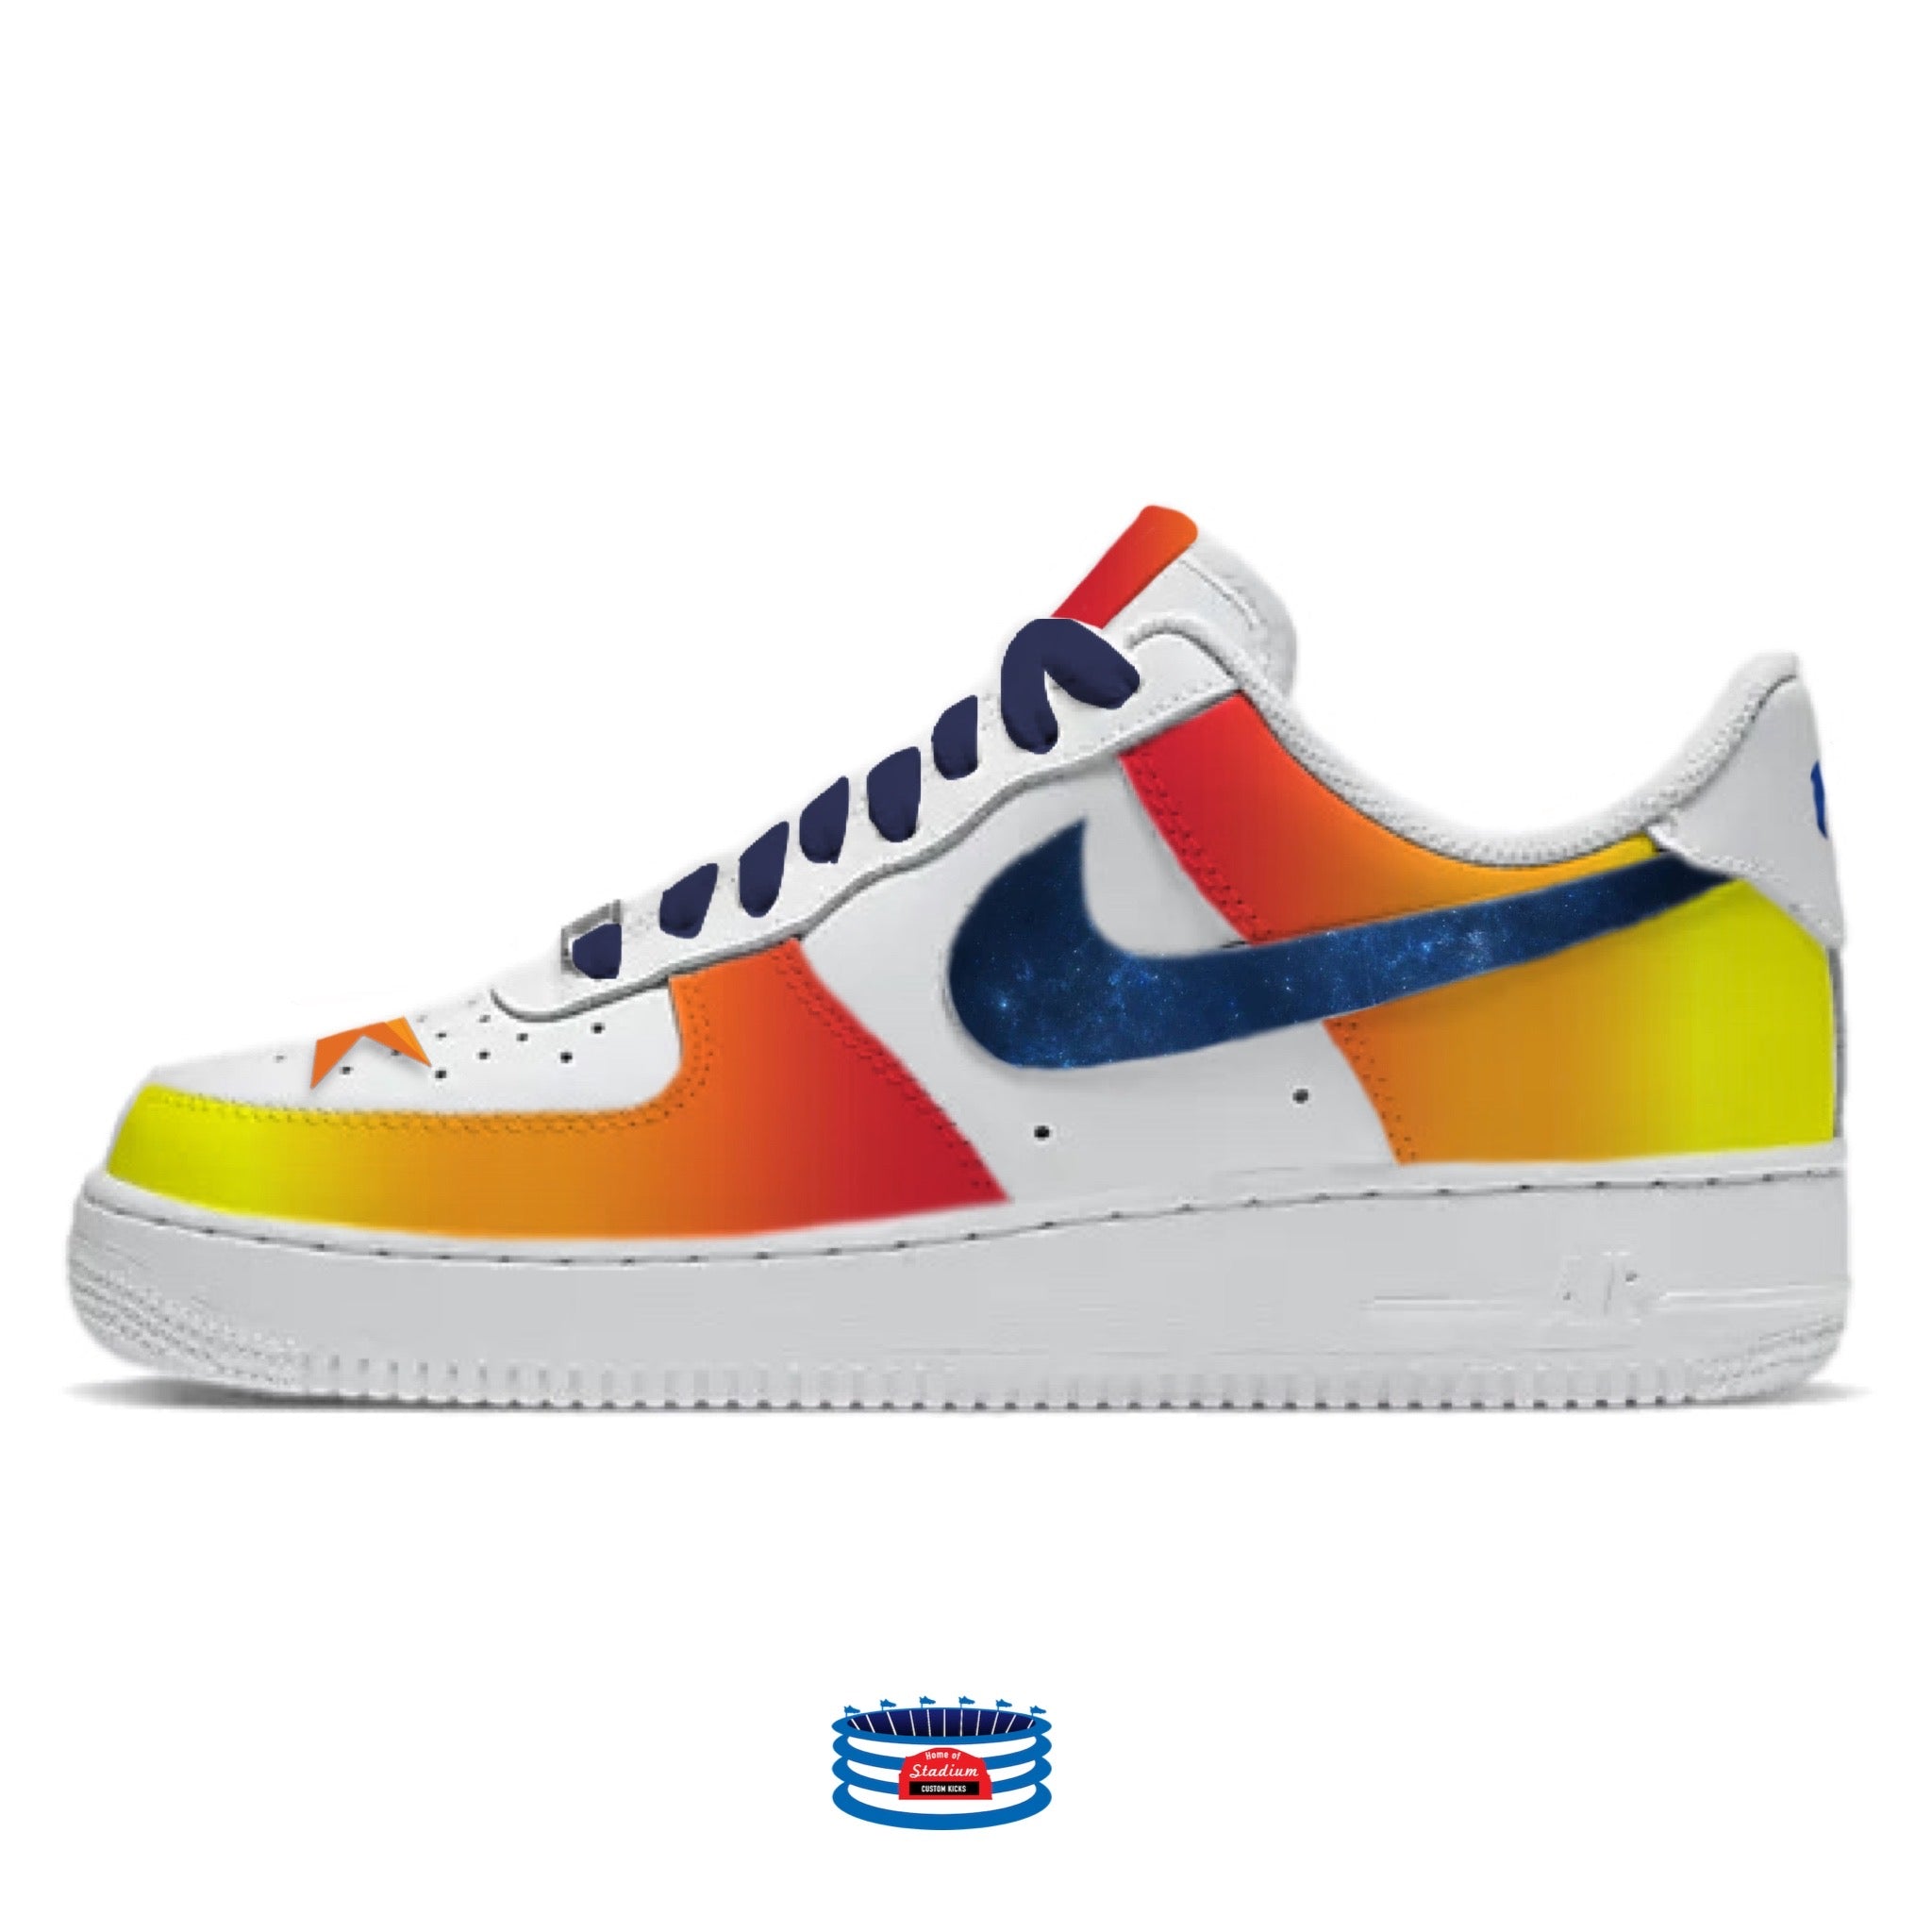 Houston Nike Air Force 1 Low Shoes Women's / 12